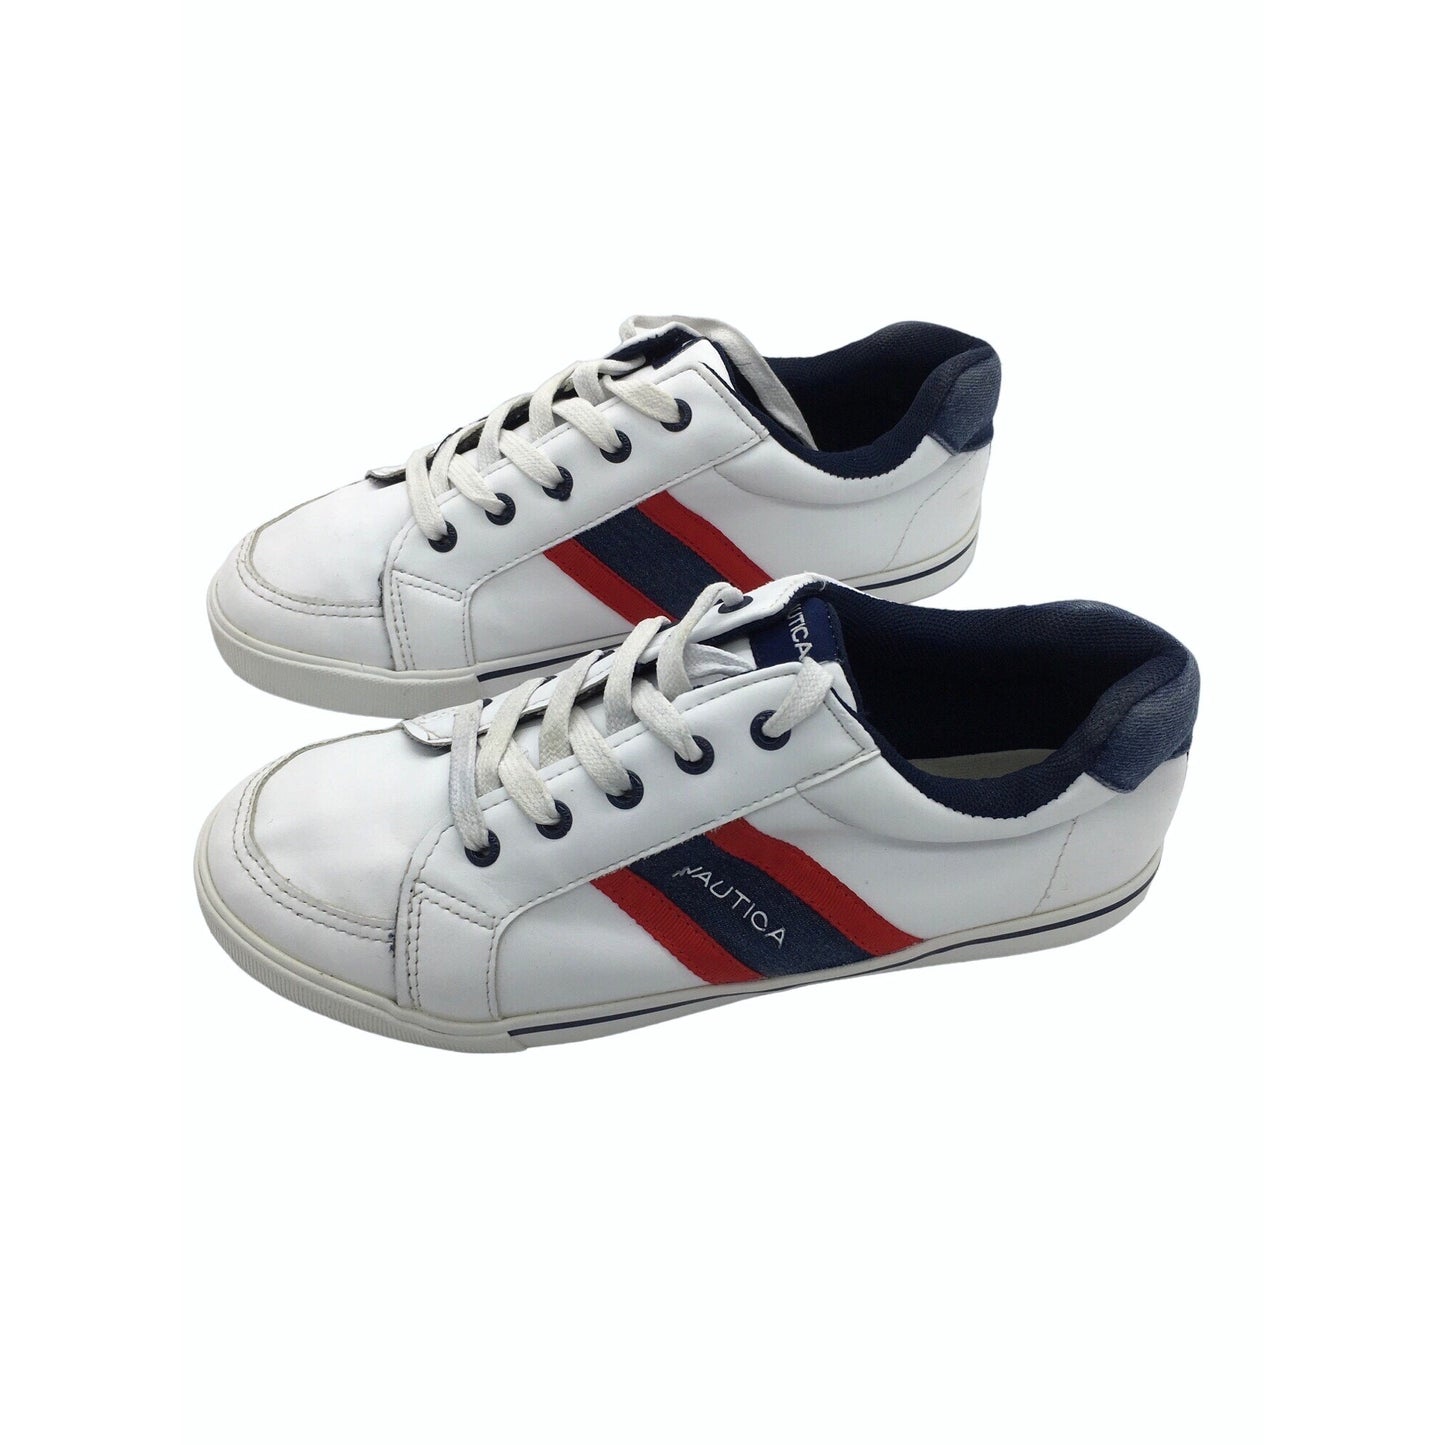 Nautica casual tennis shoes size 5 youth